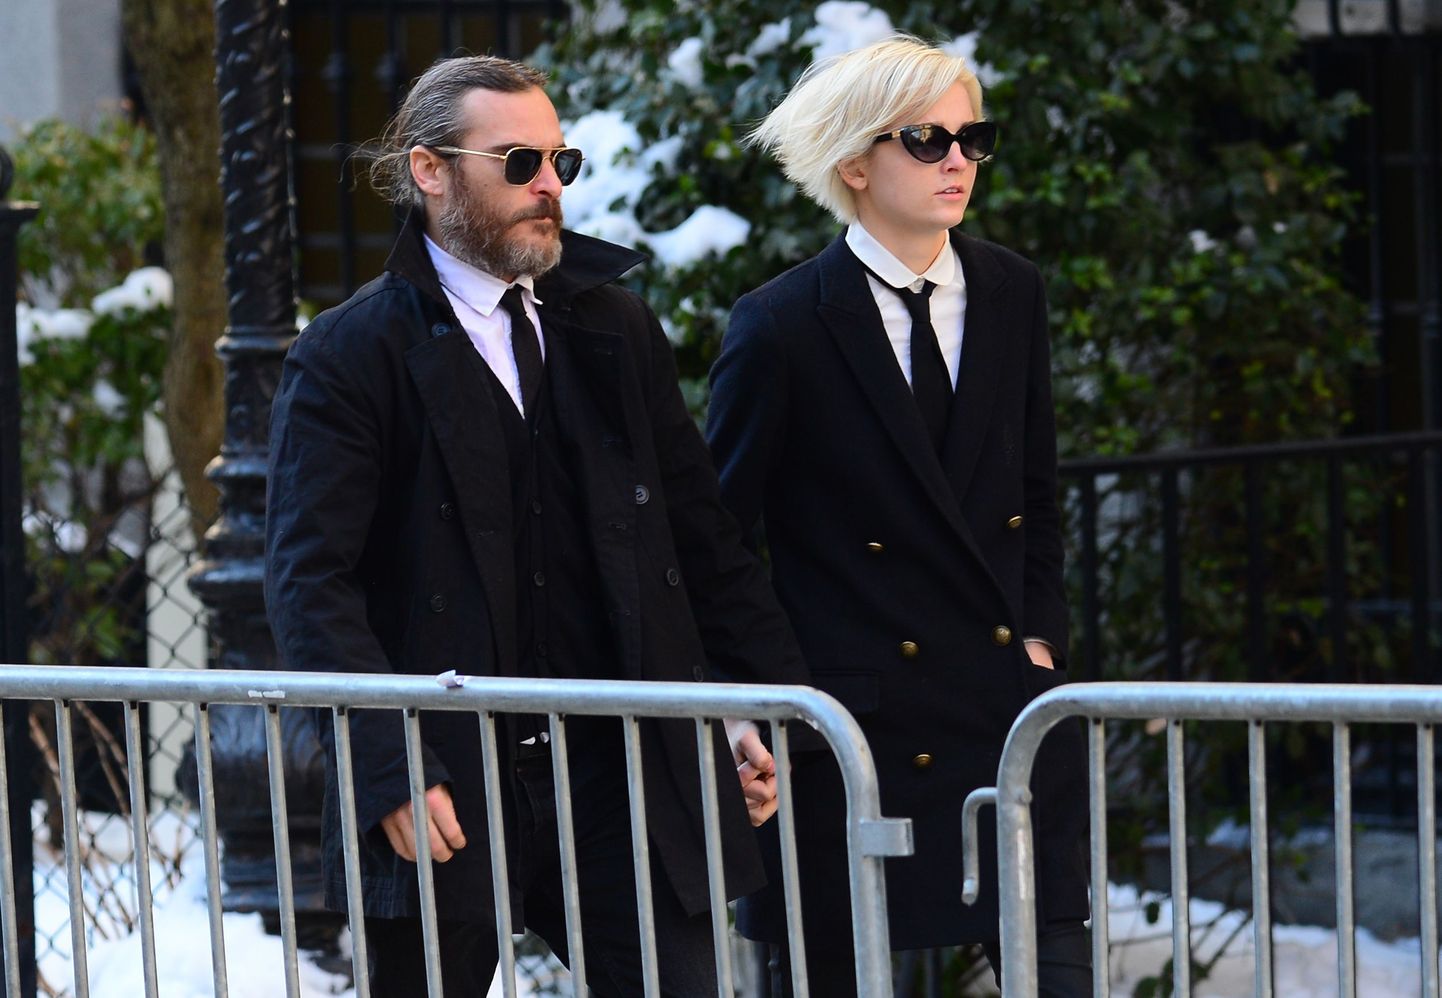 Actor Joaquin Phoenix arrives to attend late actor Philip Seymour Hoffman's funeral at St. Ignatius of Loyola Church in New York, February 7, 2014.  Friends and relatives of Oscar-winning actor Philip Seymour Hoffman gathered in New York for his private funeral Friday, five days after he was found dead of a suspected overdose. The mass was closed to the public and press at the Church of  St. Ignatius Loyola on Park Avenue, which also held the 1994 funeral of Jacqueline Kennedy Onassis, the wife of assassinated US president John F. Kennedy. AFP PHOTO/Emmanuel Dunand